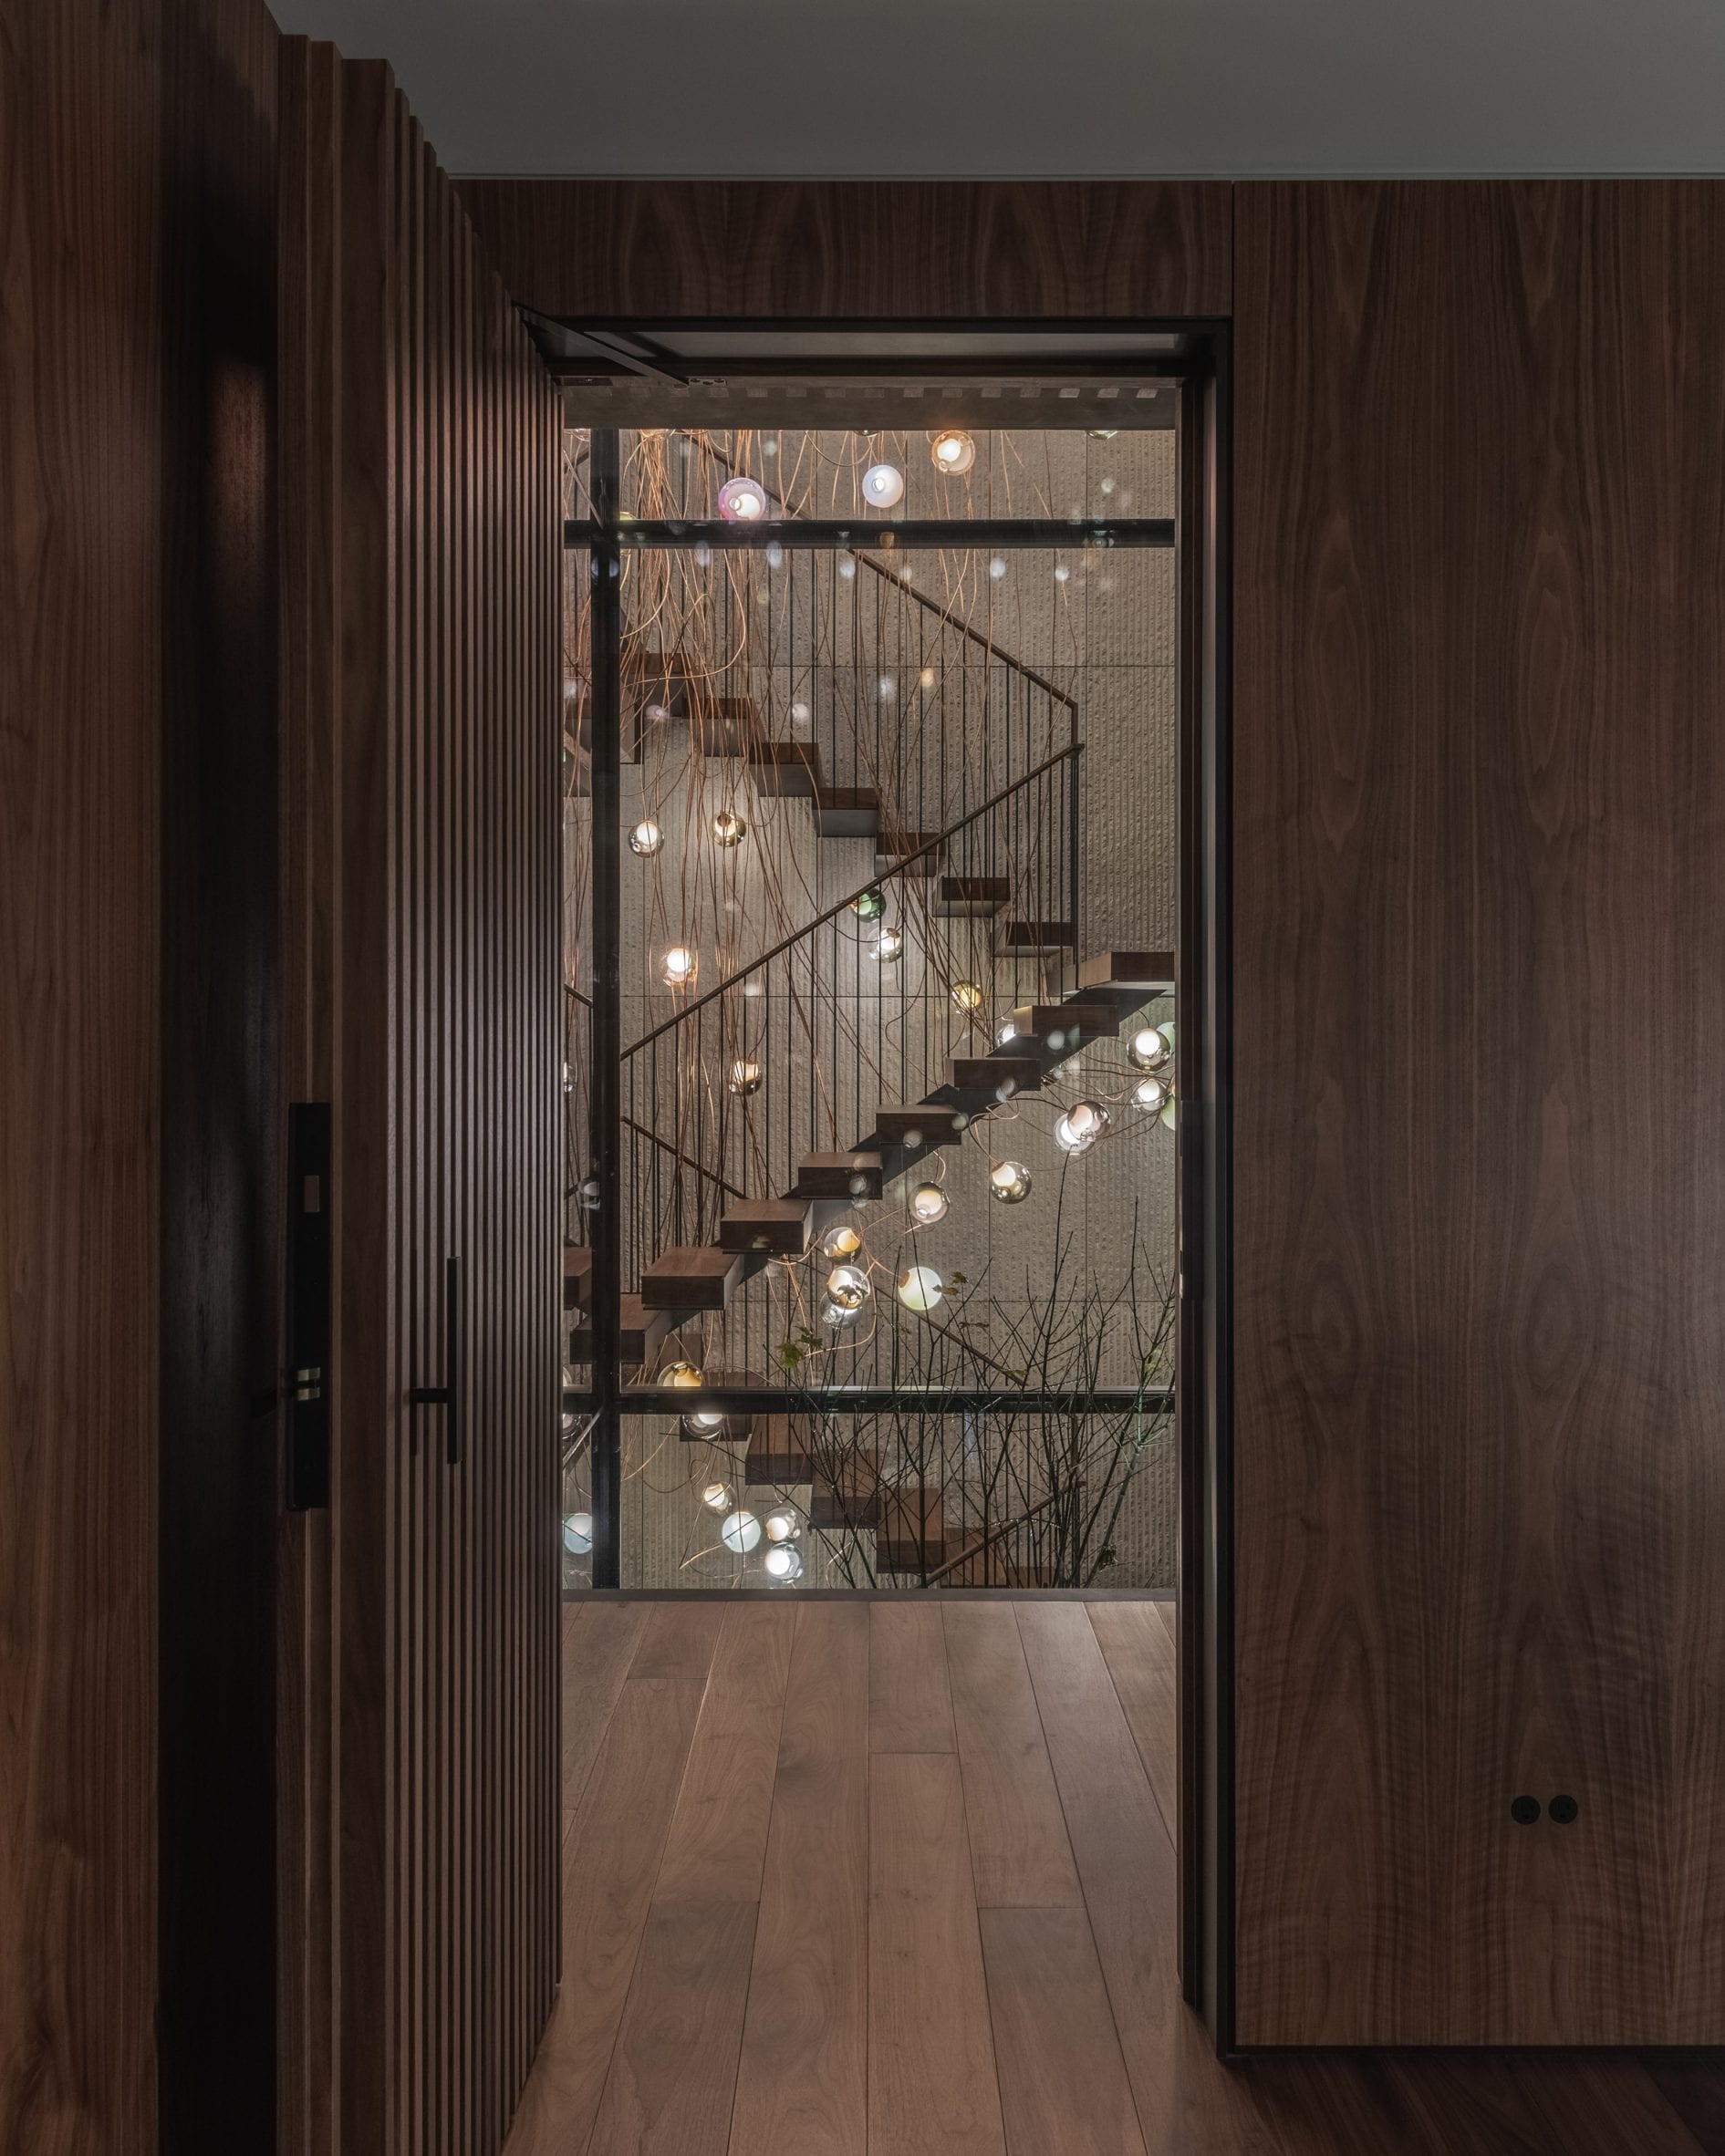 A lighting installation floats in the stairwell